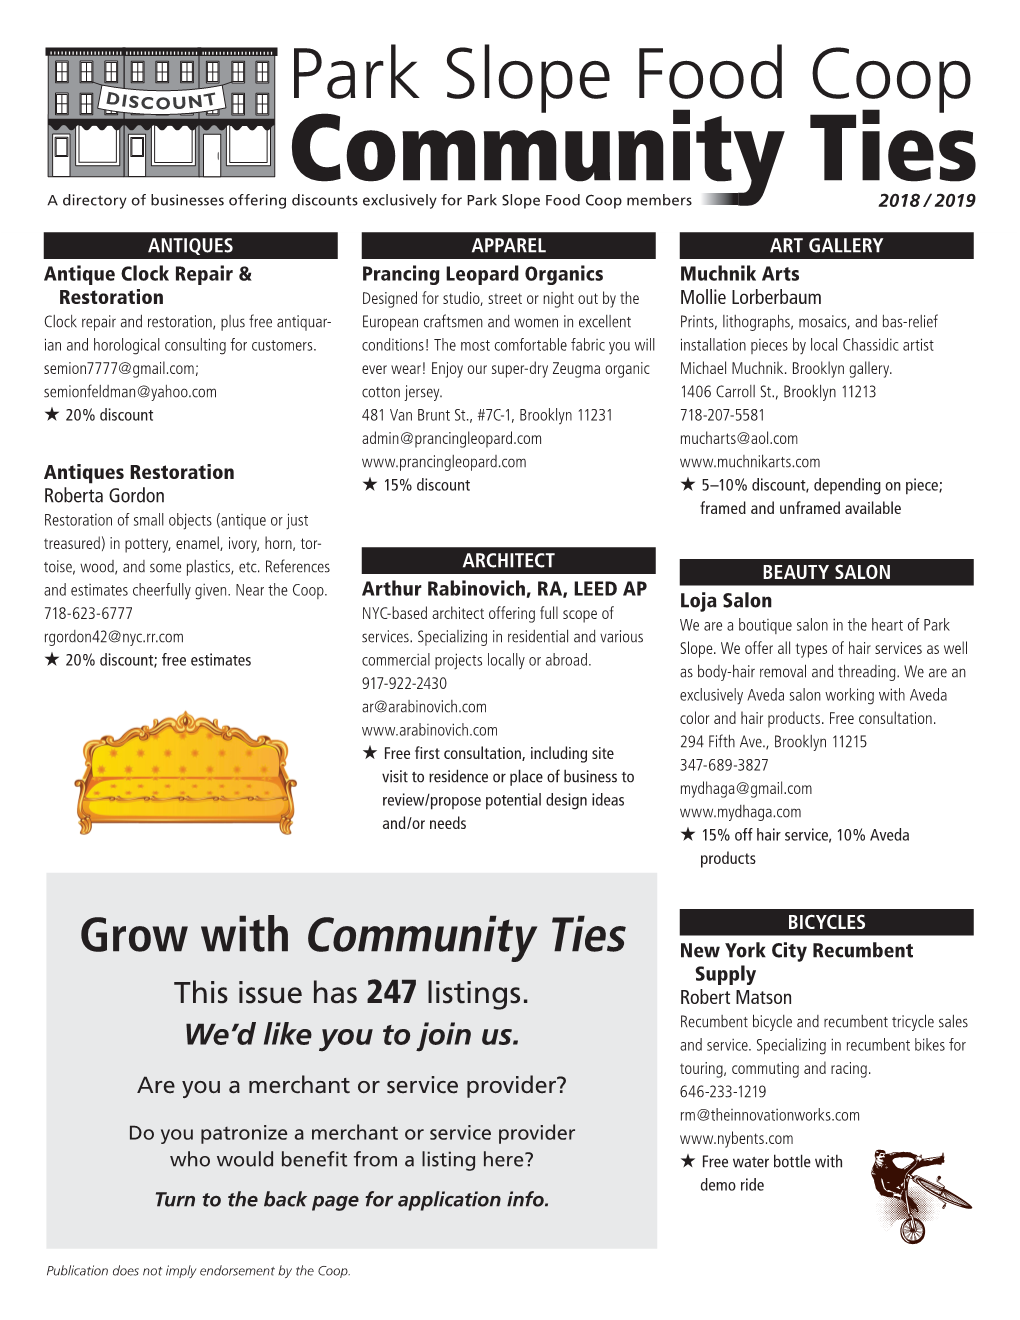 Grow with Community Ties New York City Recumbent Supply This Issue Has 247 Listings